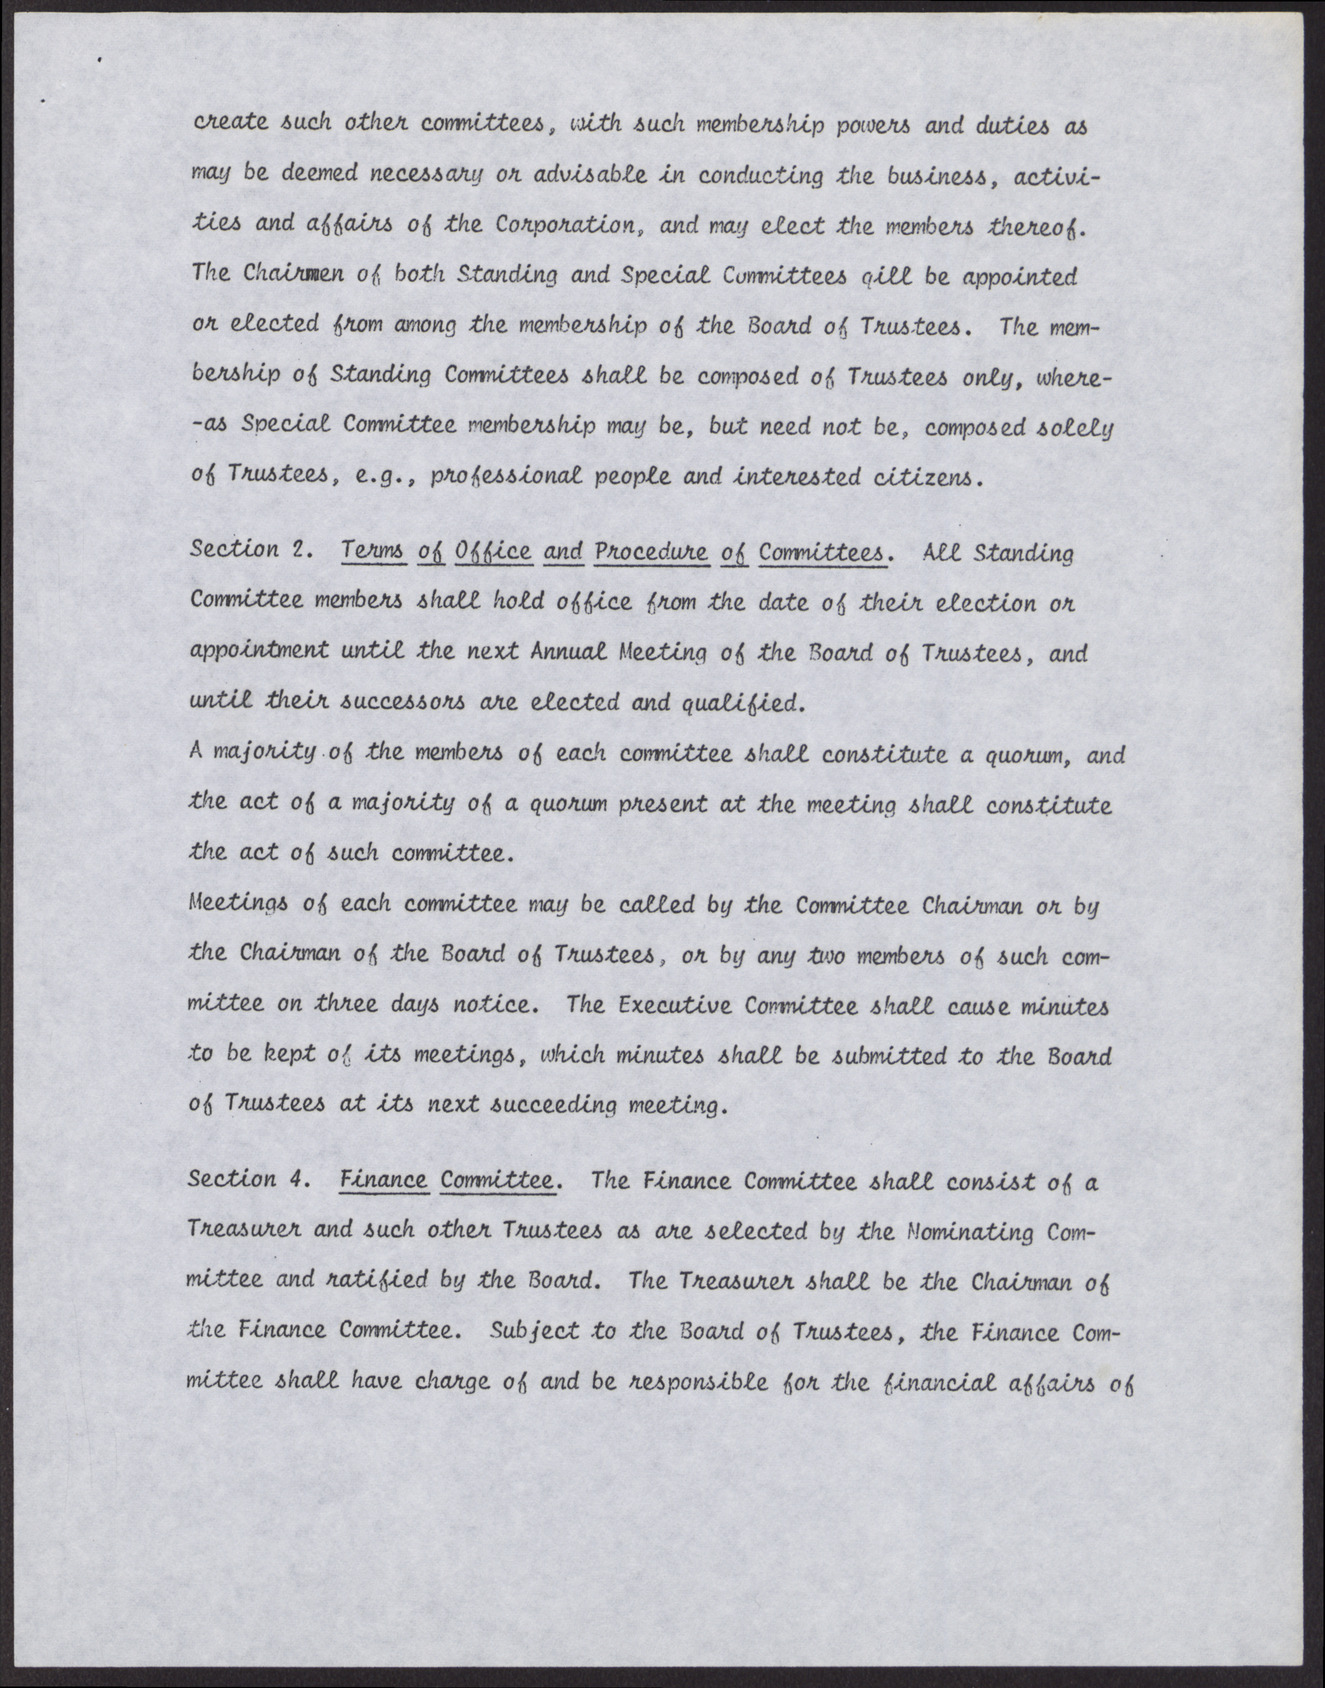 Operation Independence Incorporated Bylaws (9 pages), no date, page 5